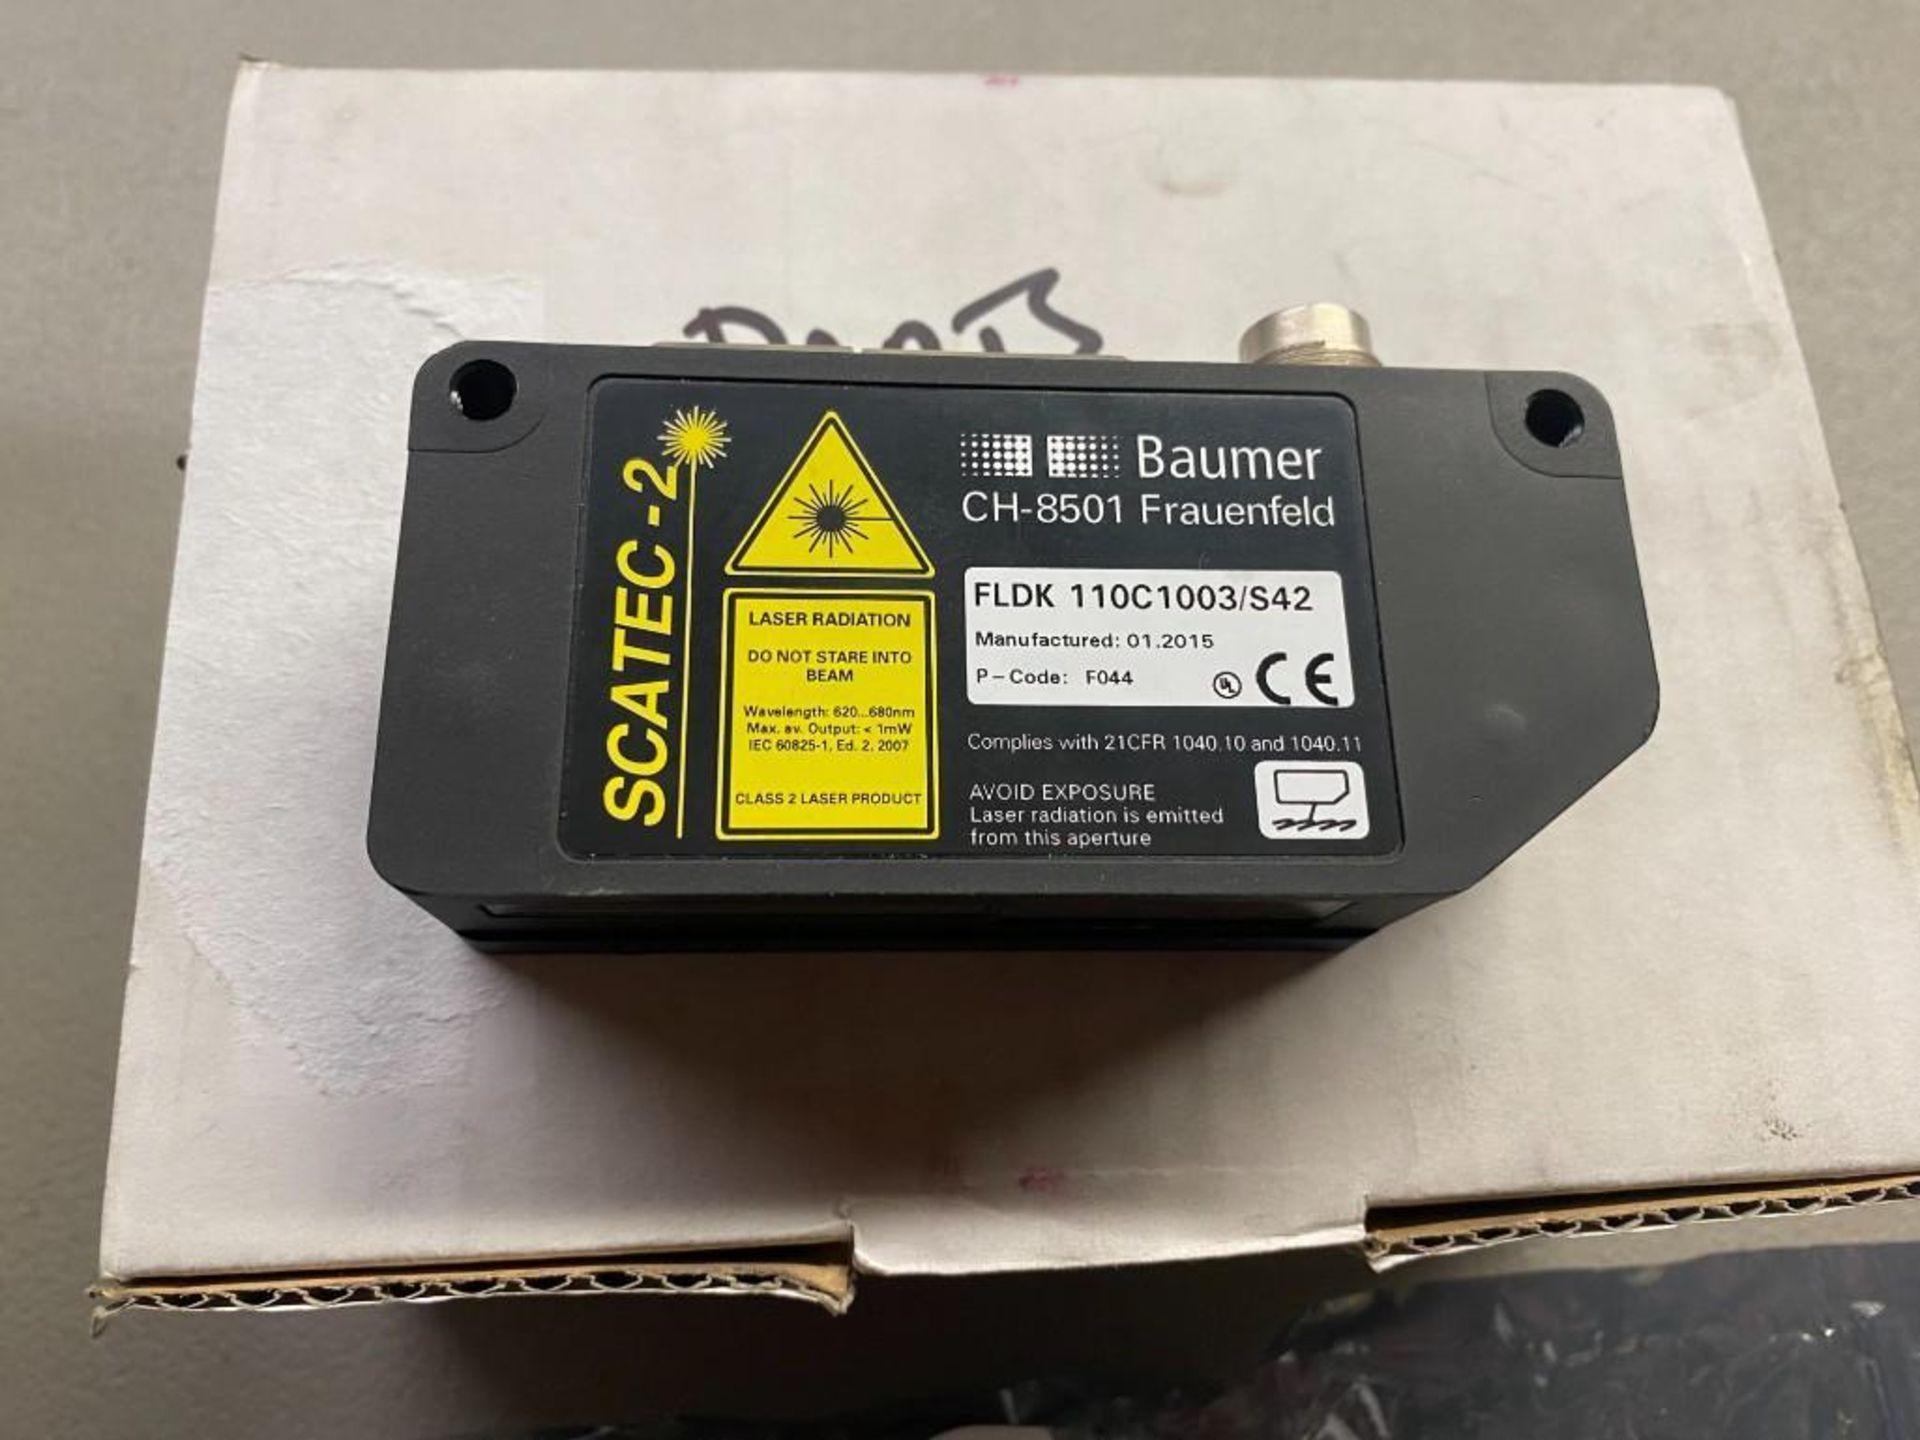 LOT OF 3: BAUMER FLDK 110C1003/S42 *PARTS ONLY*/BAUMER SCATEC-2 CH-8501/DENEX 51E3000. Packaging Fee - Image 5 of 5